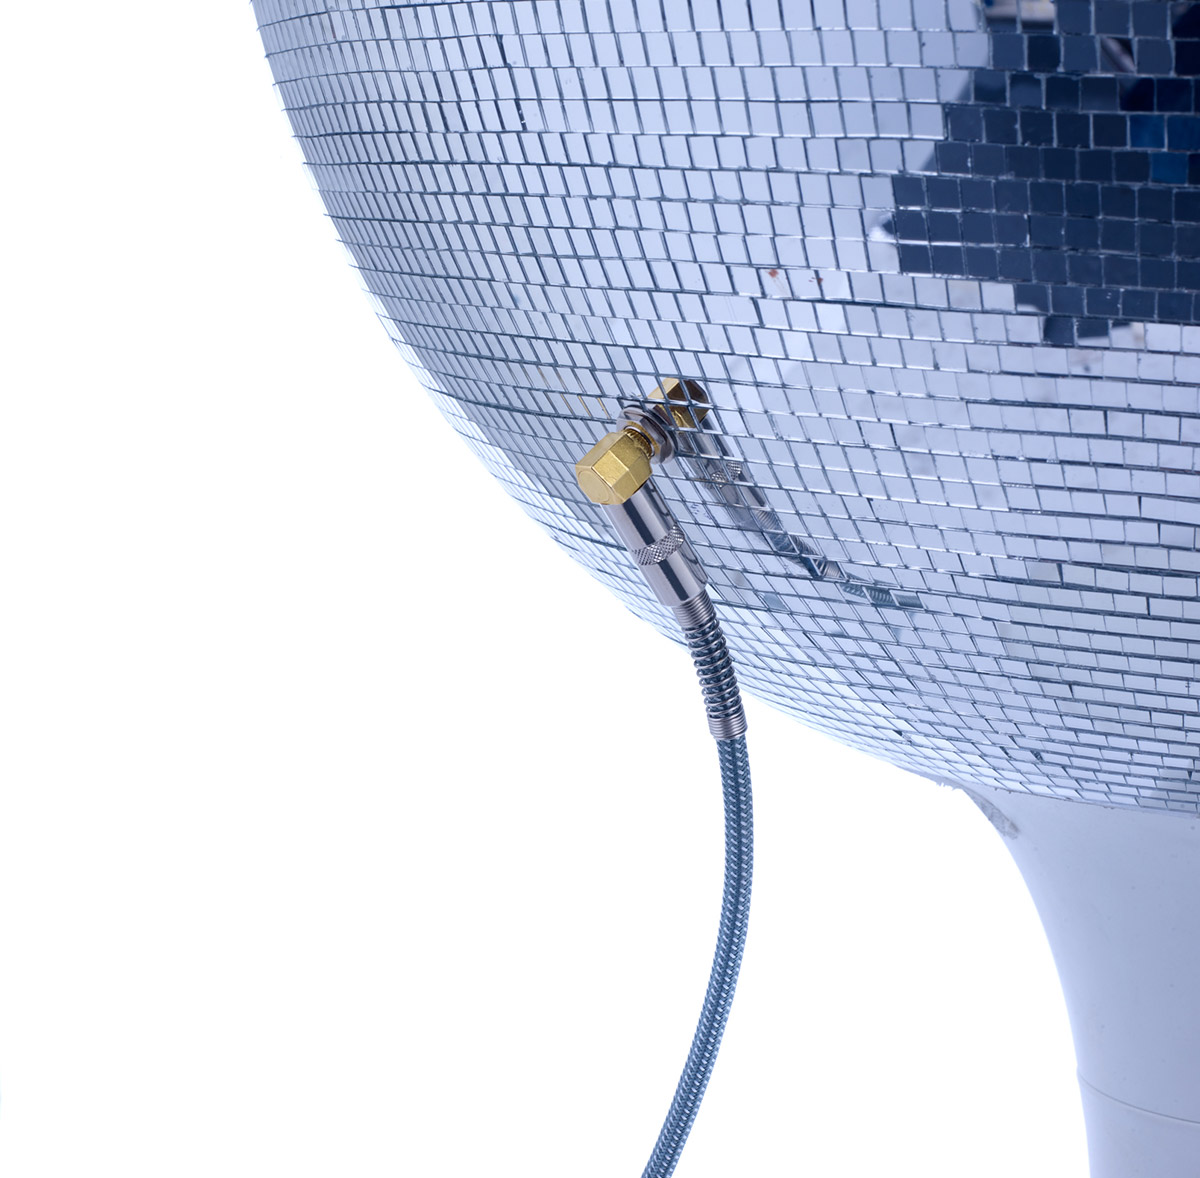 The Mirrorball Icon plugs in with a Fender Guitar lead